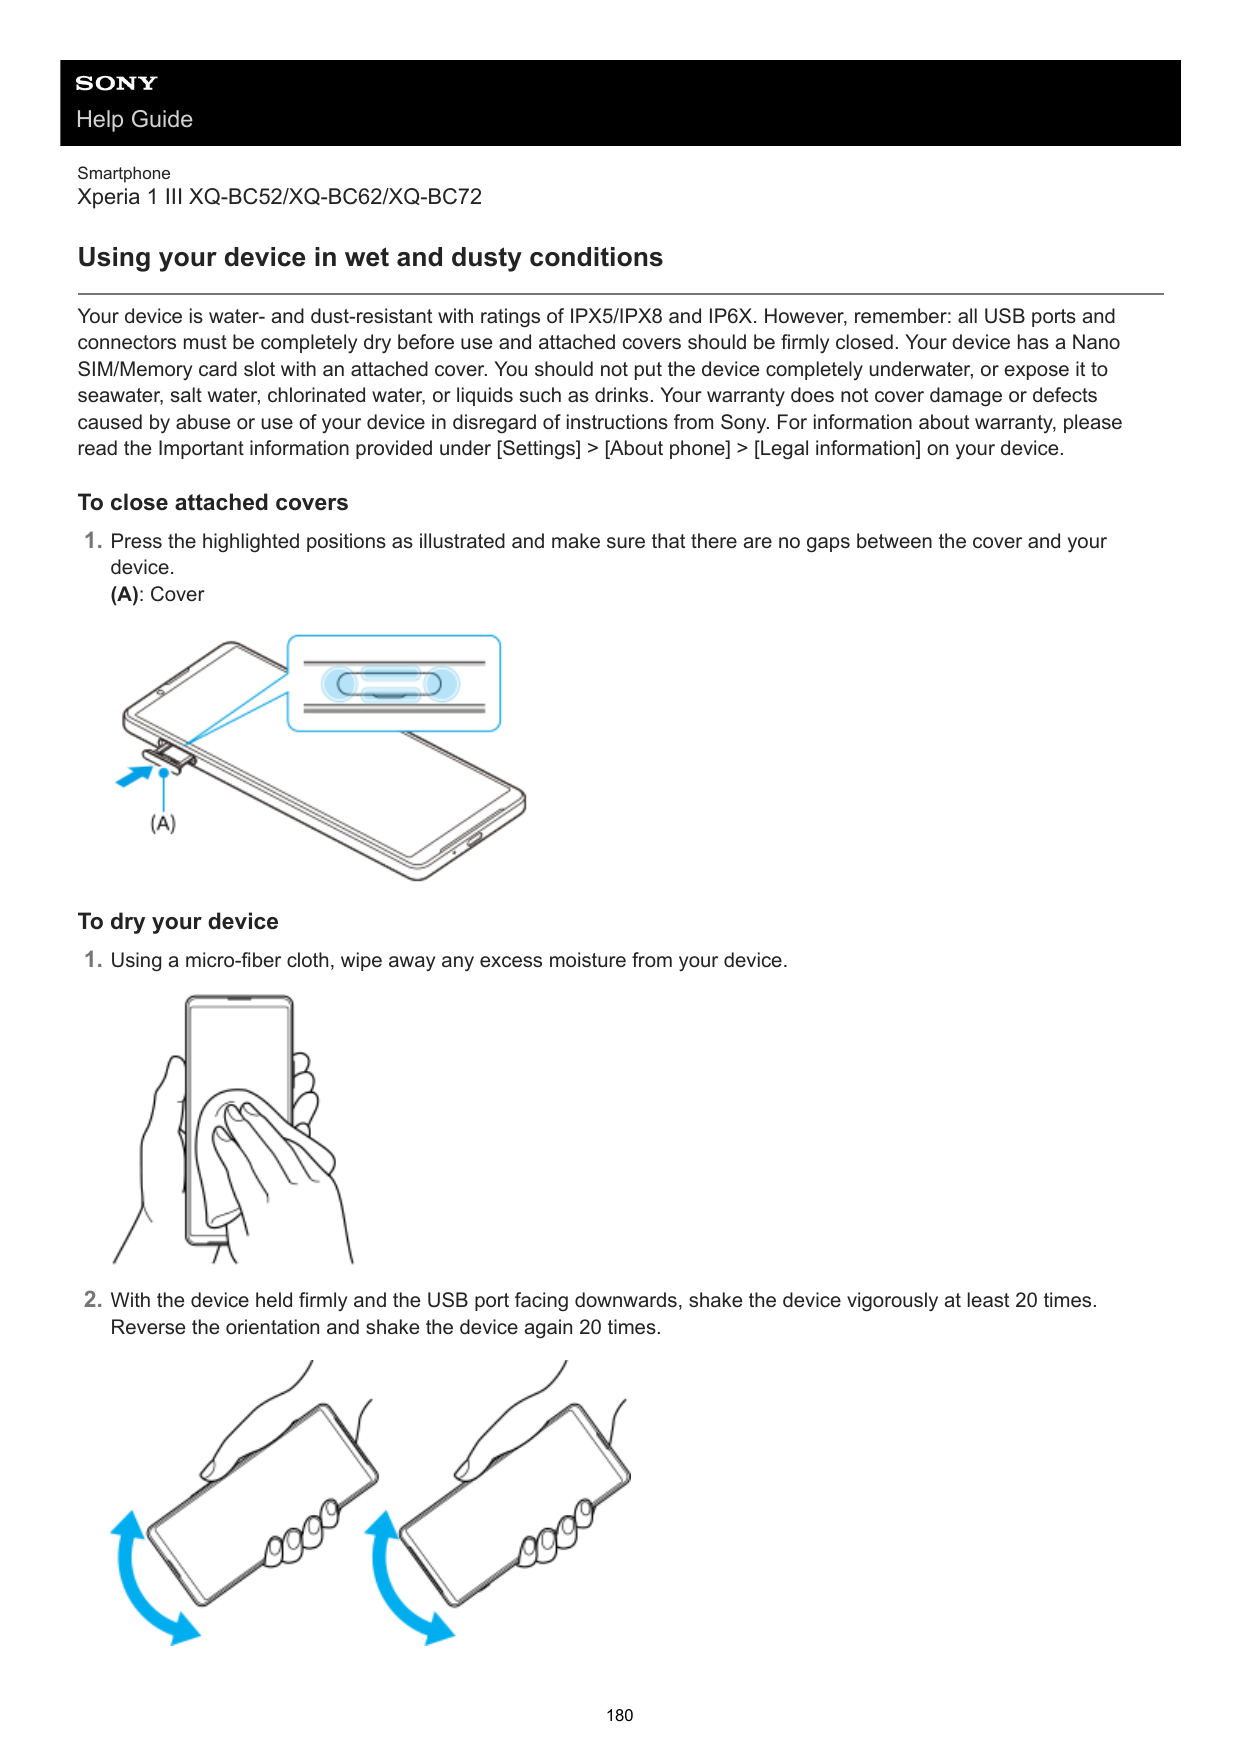 Help GuideSmartphoneXperia 1 III XQ-BC52/XQ-BC62/XQ-BC72Using your device in wet and dusty conditionsYour device is water- and d